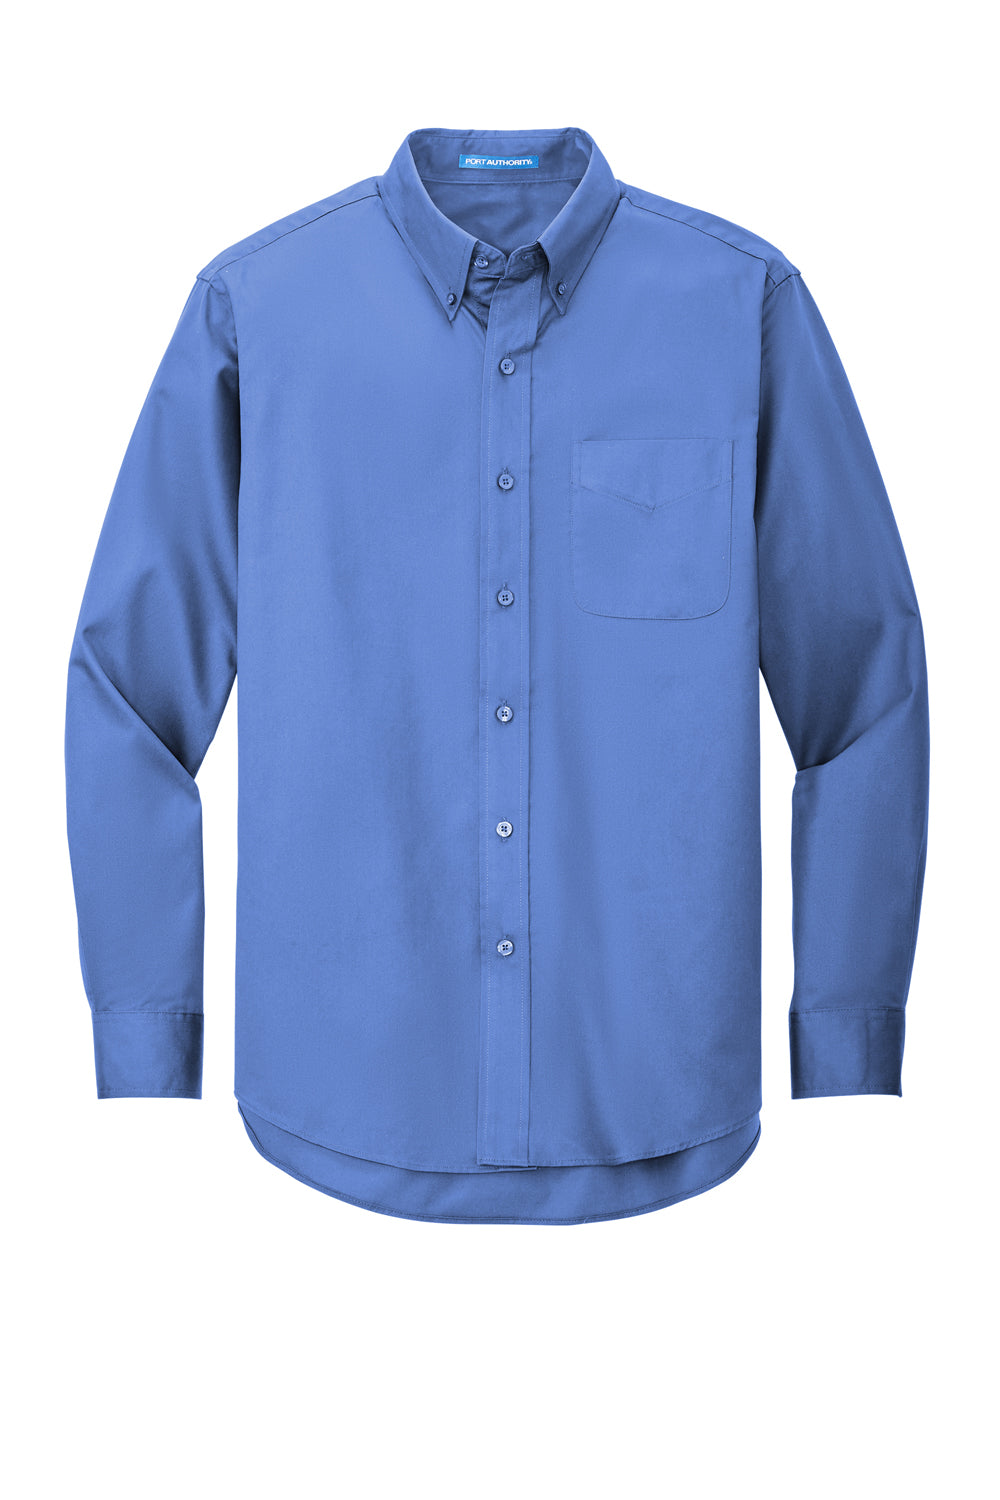 Port Authority S608/TLS608/S608ES Mens Easy Care Wrinkle Resistant Long Sleeve Button Down Shirt w/ Pocket Ultramarine Blue Flat Front